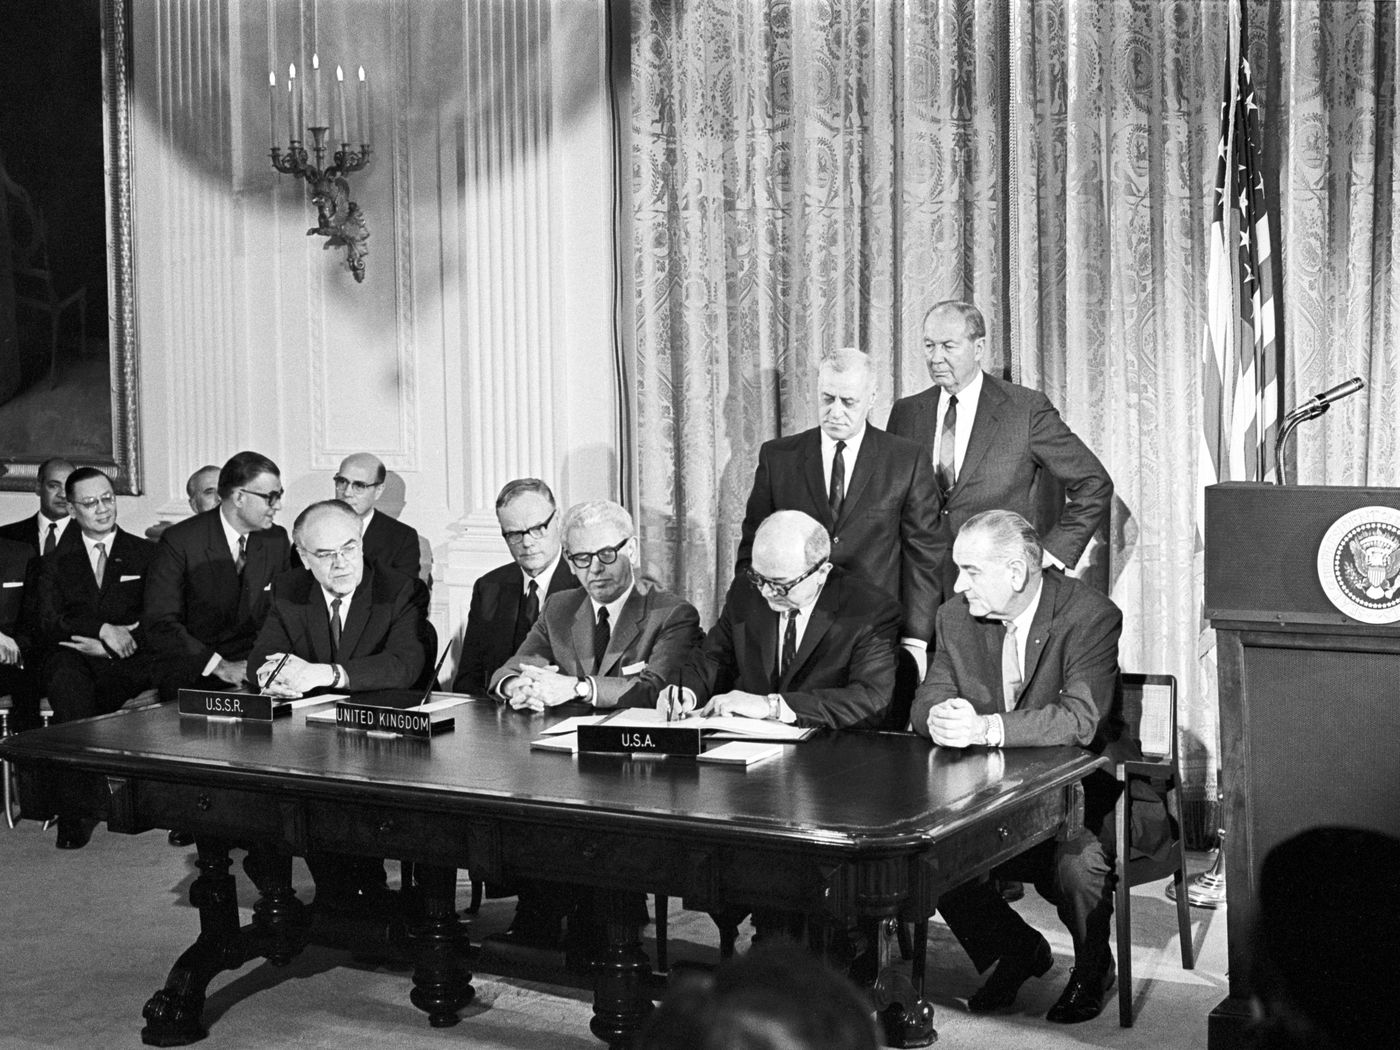 A black and white photograph of a group of men signing the Outer Space Treaty in 1967